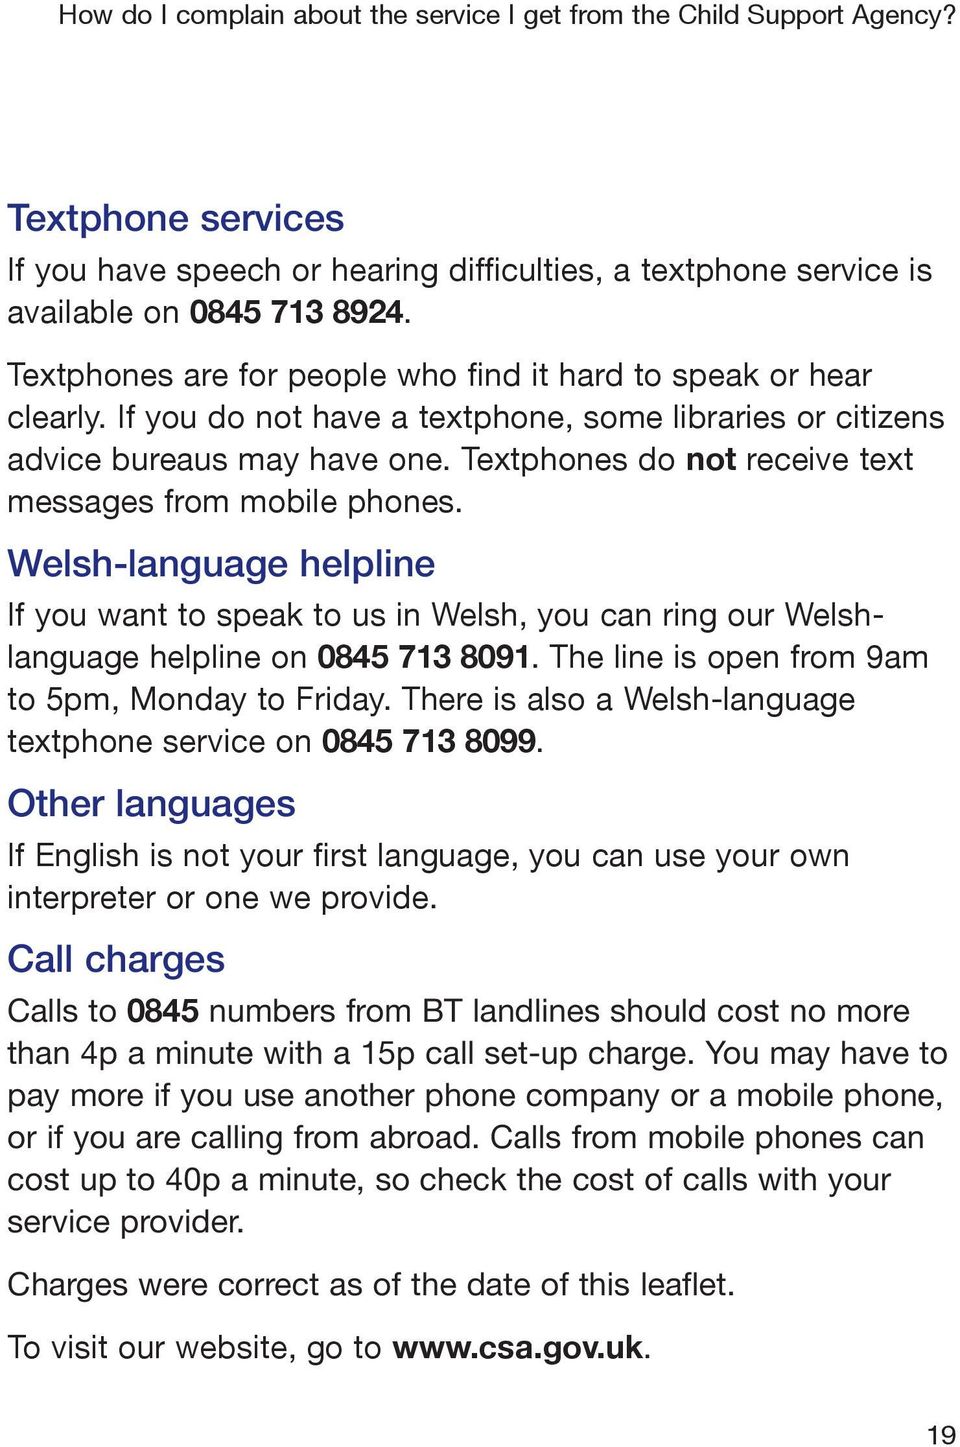 Welsh language helpline If you want to speak to us in Welsh, you can ring our Welshlanguage helpline on 0845 713 8091. The line is open from 9am to 5pm, Monday to Friday.